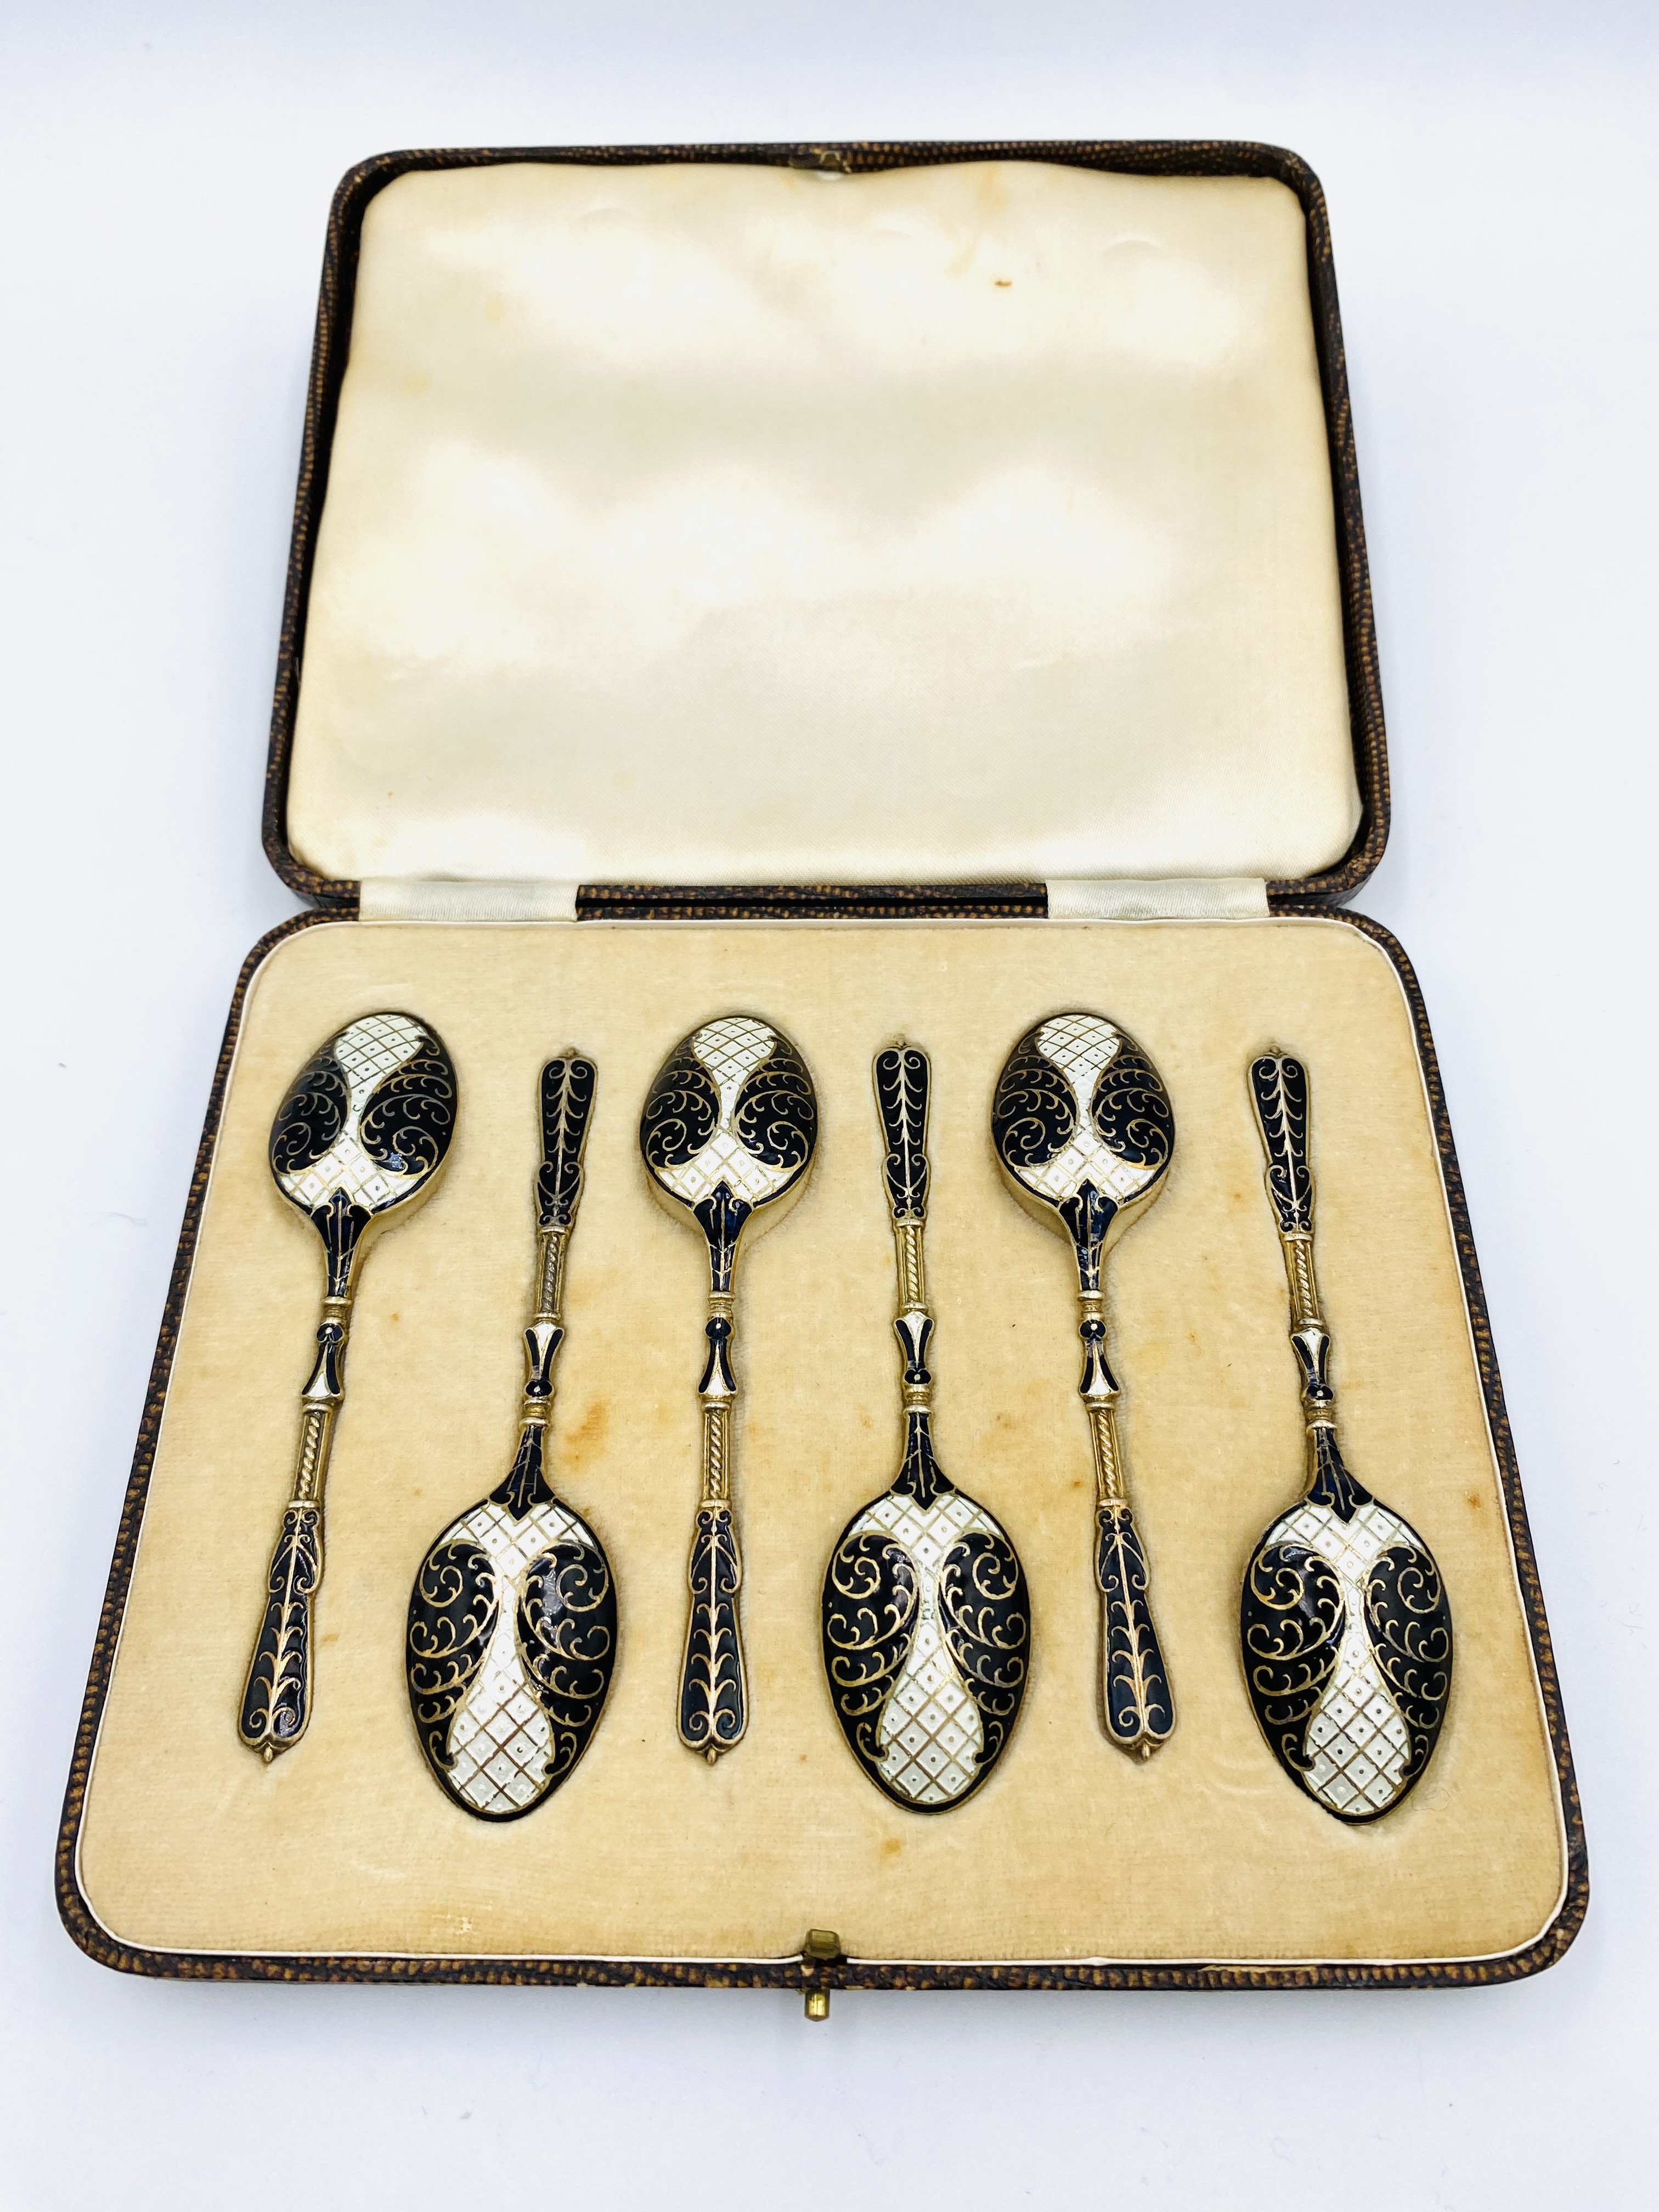 Boxed set of six silver and enamel tea spoons